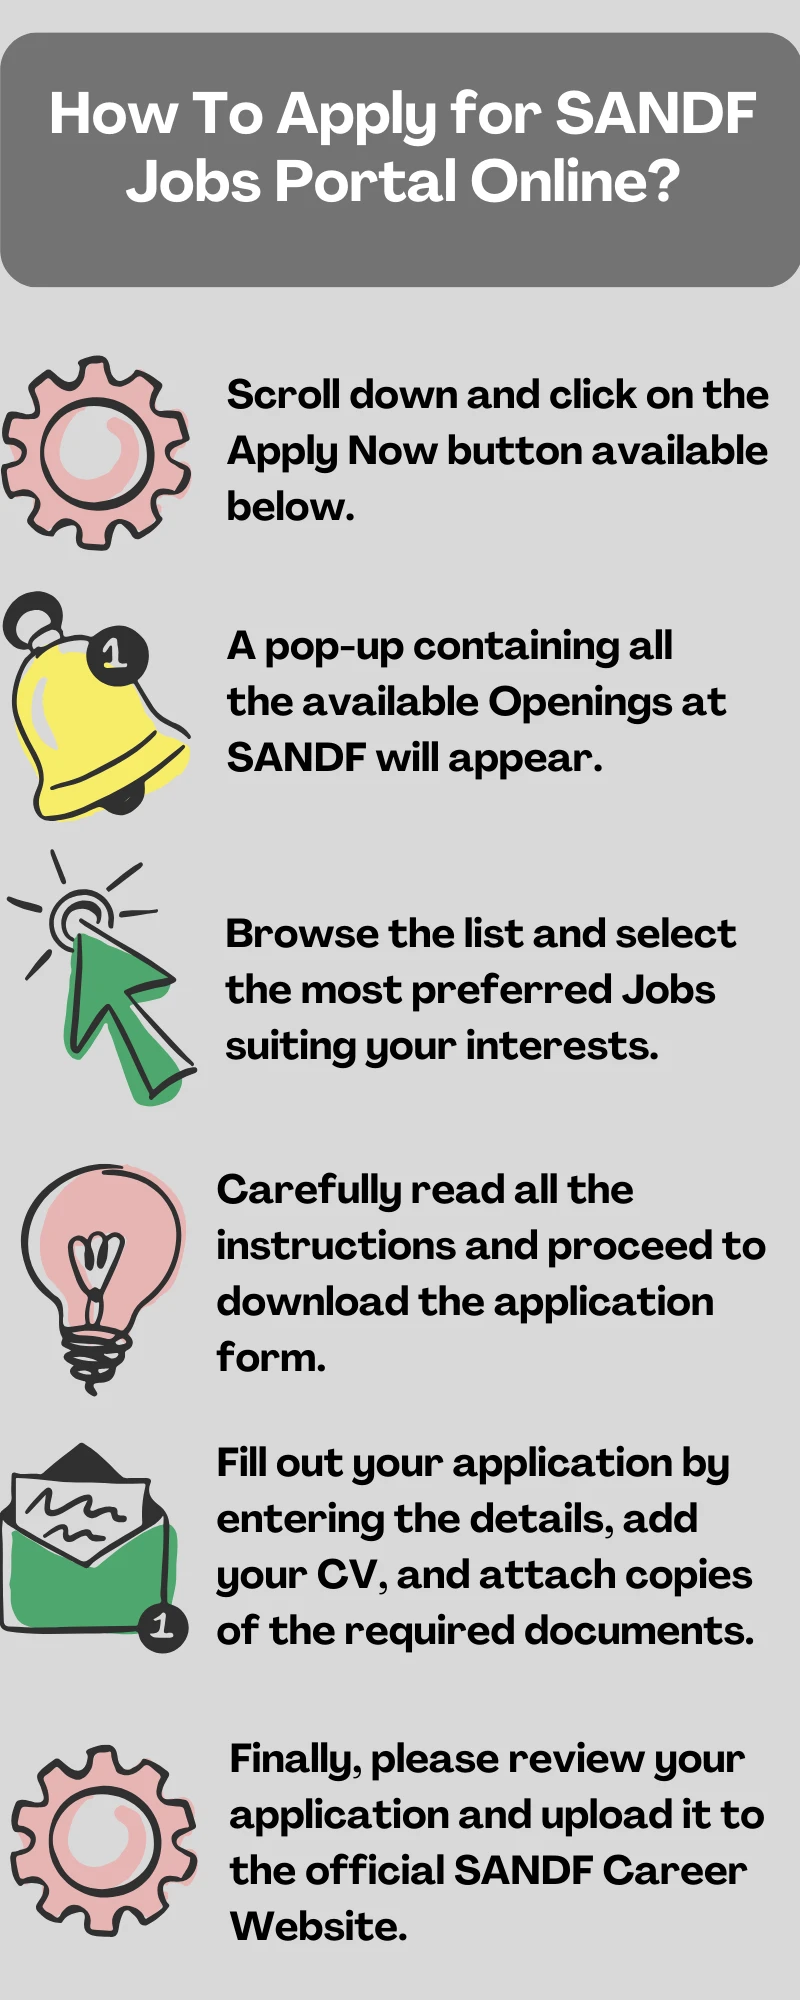 How To Apply for SANDF Jobs Portal Online?